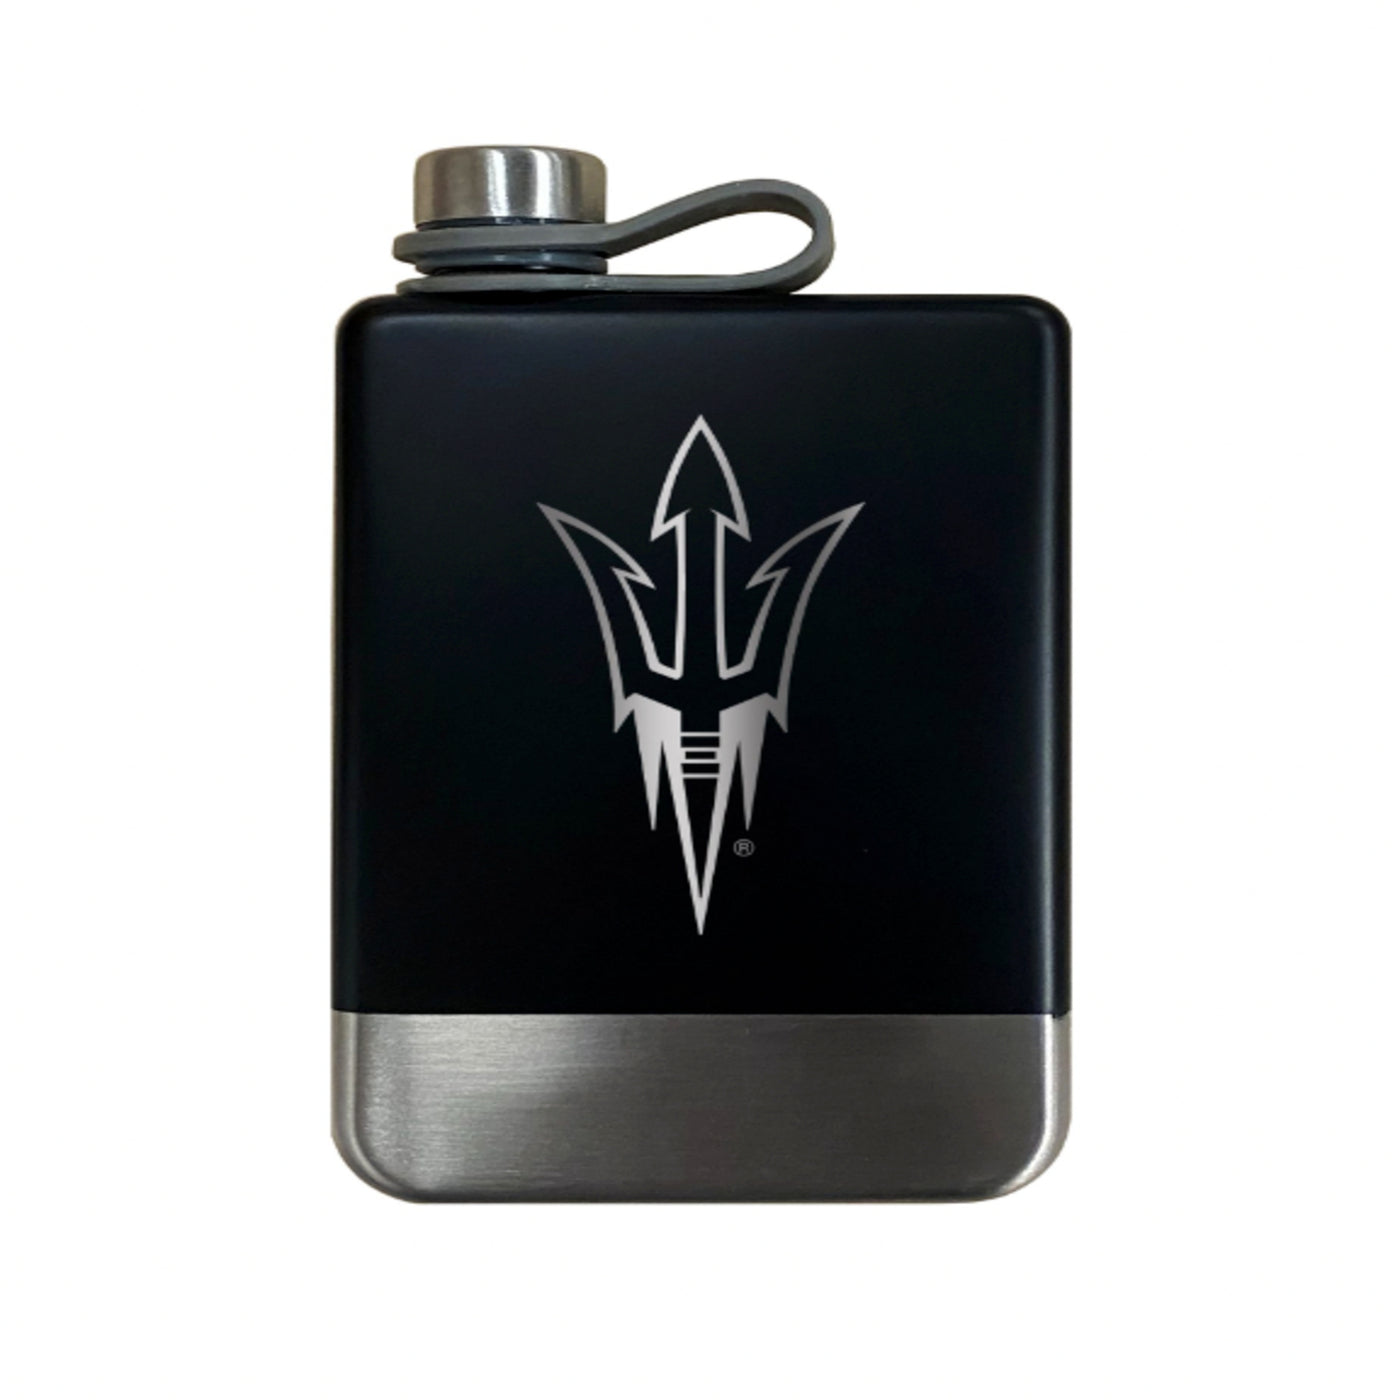 ASU stainless steel flask. Mainly black with pitchfork logo etched in to reveal the steel. 